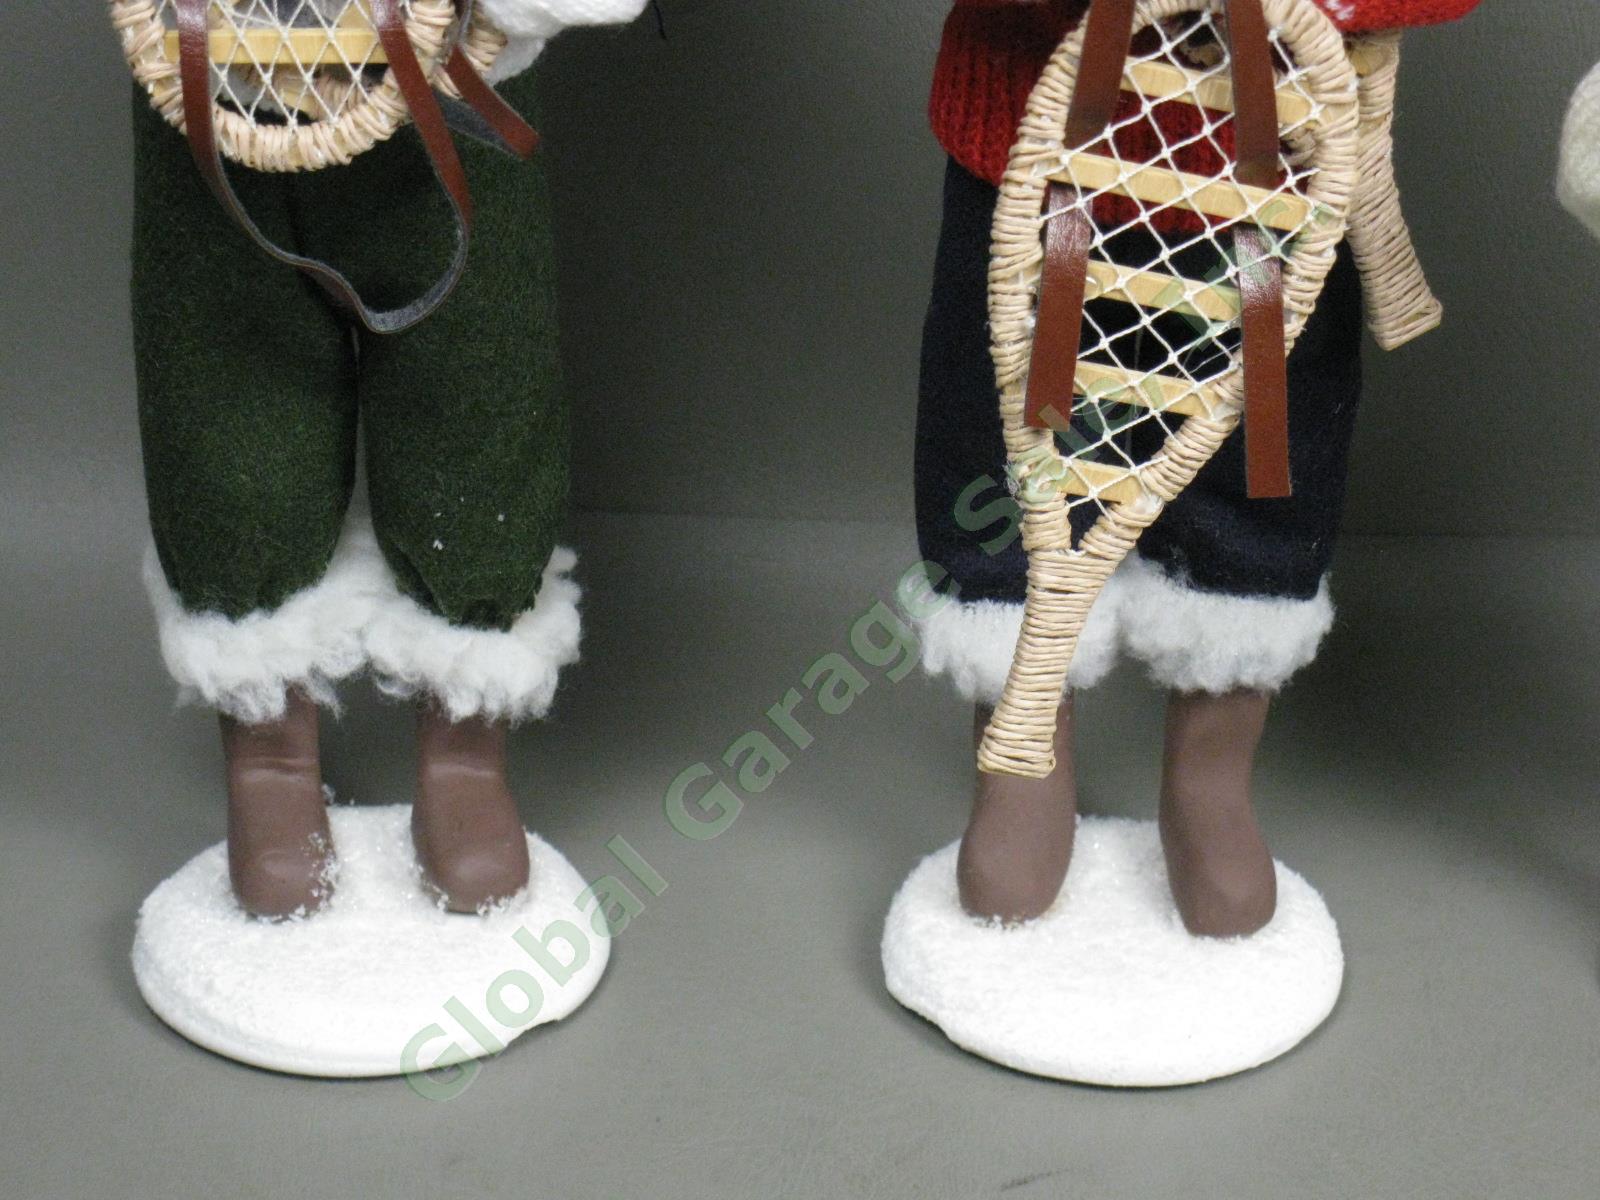 Vtg Byers Choice Carolers Lot Adults With Snowshoes +Boy Skis Signed Ltd Edition 4